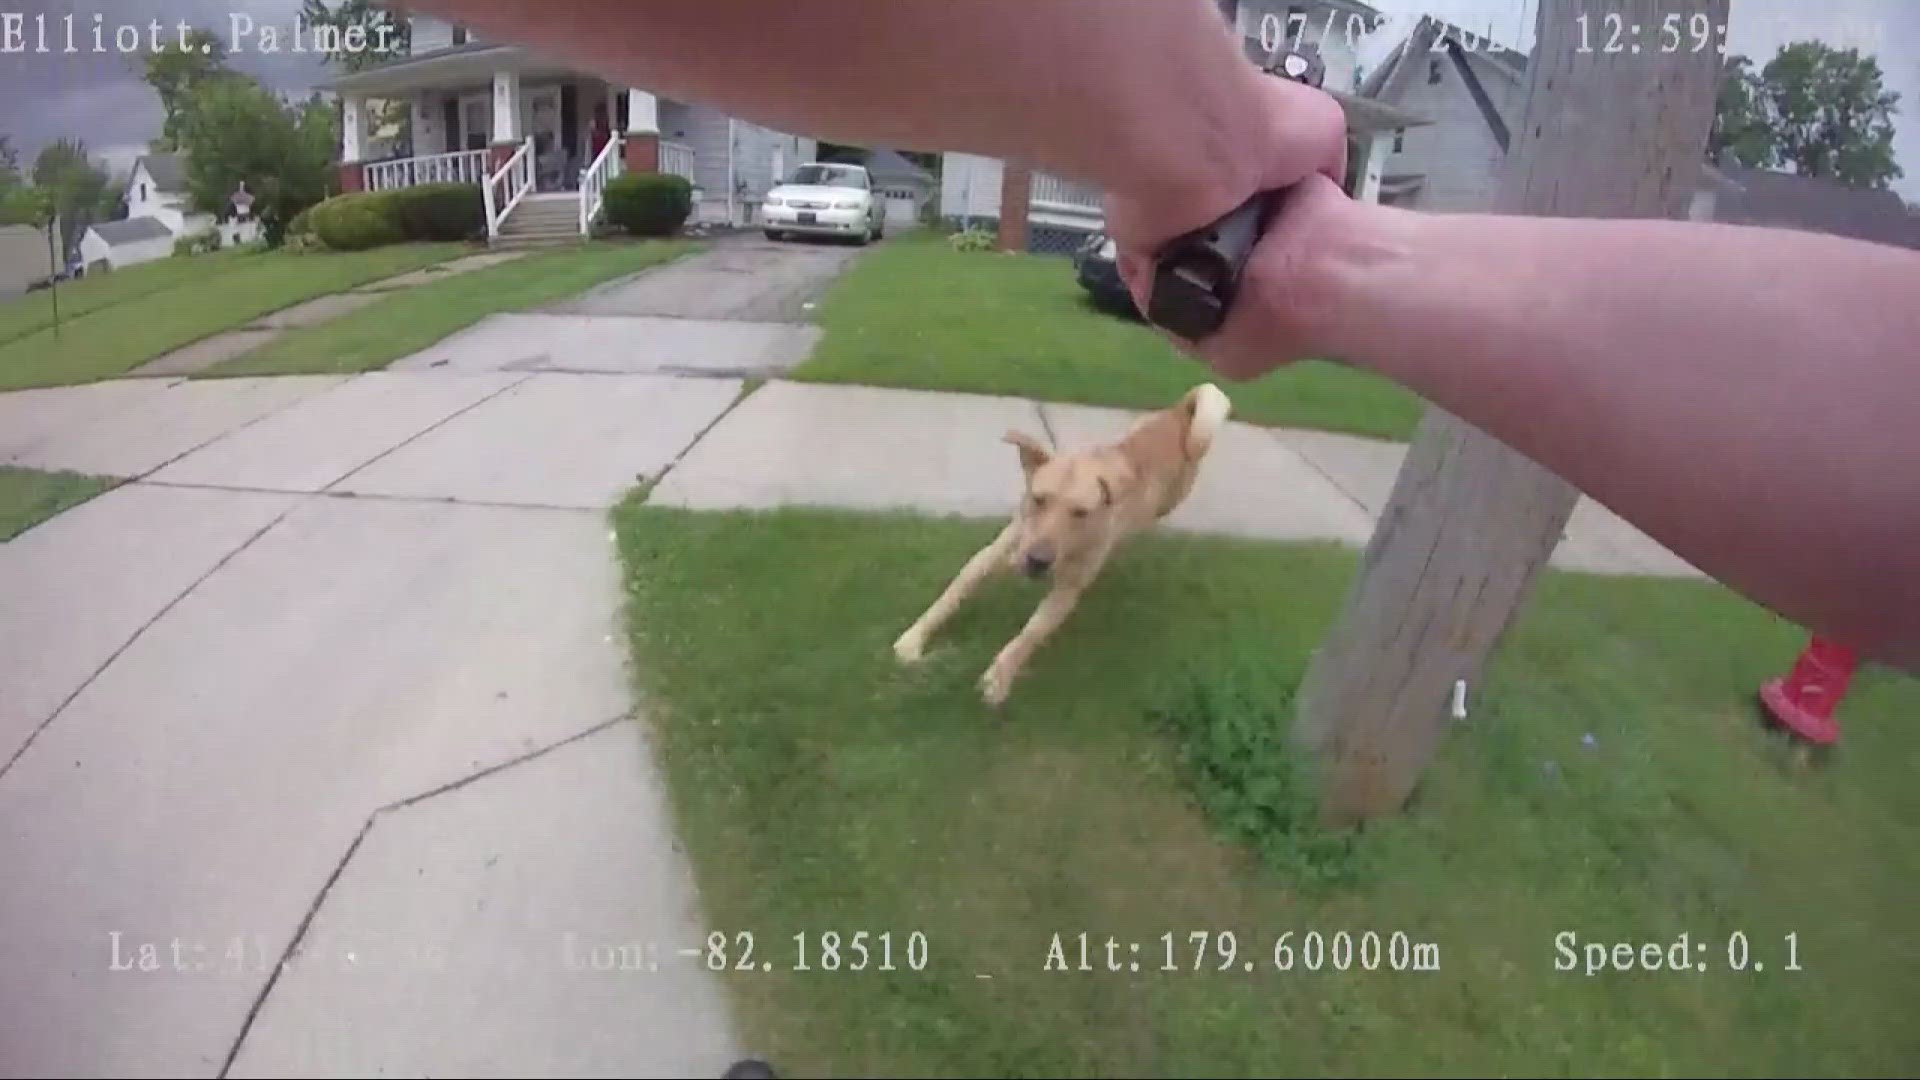 'Officer Palmer had reasonable cause to believe that the dog was going to attack him.'